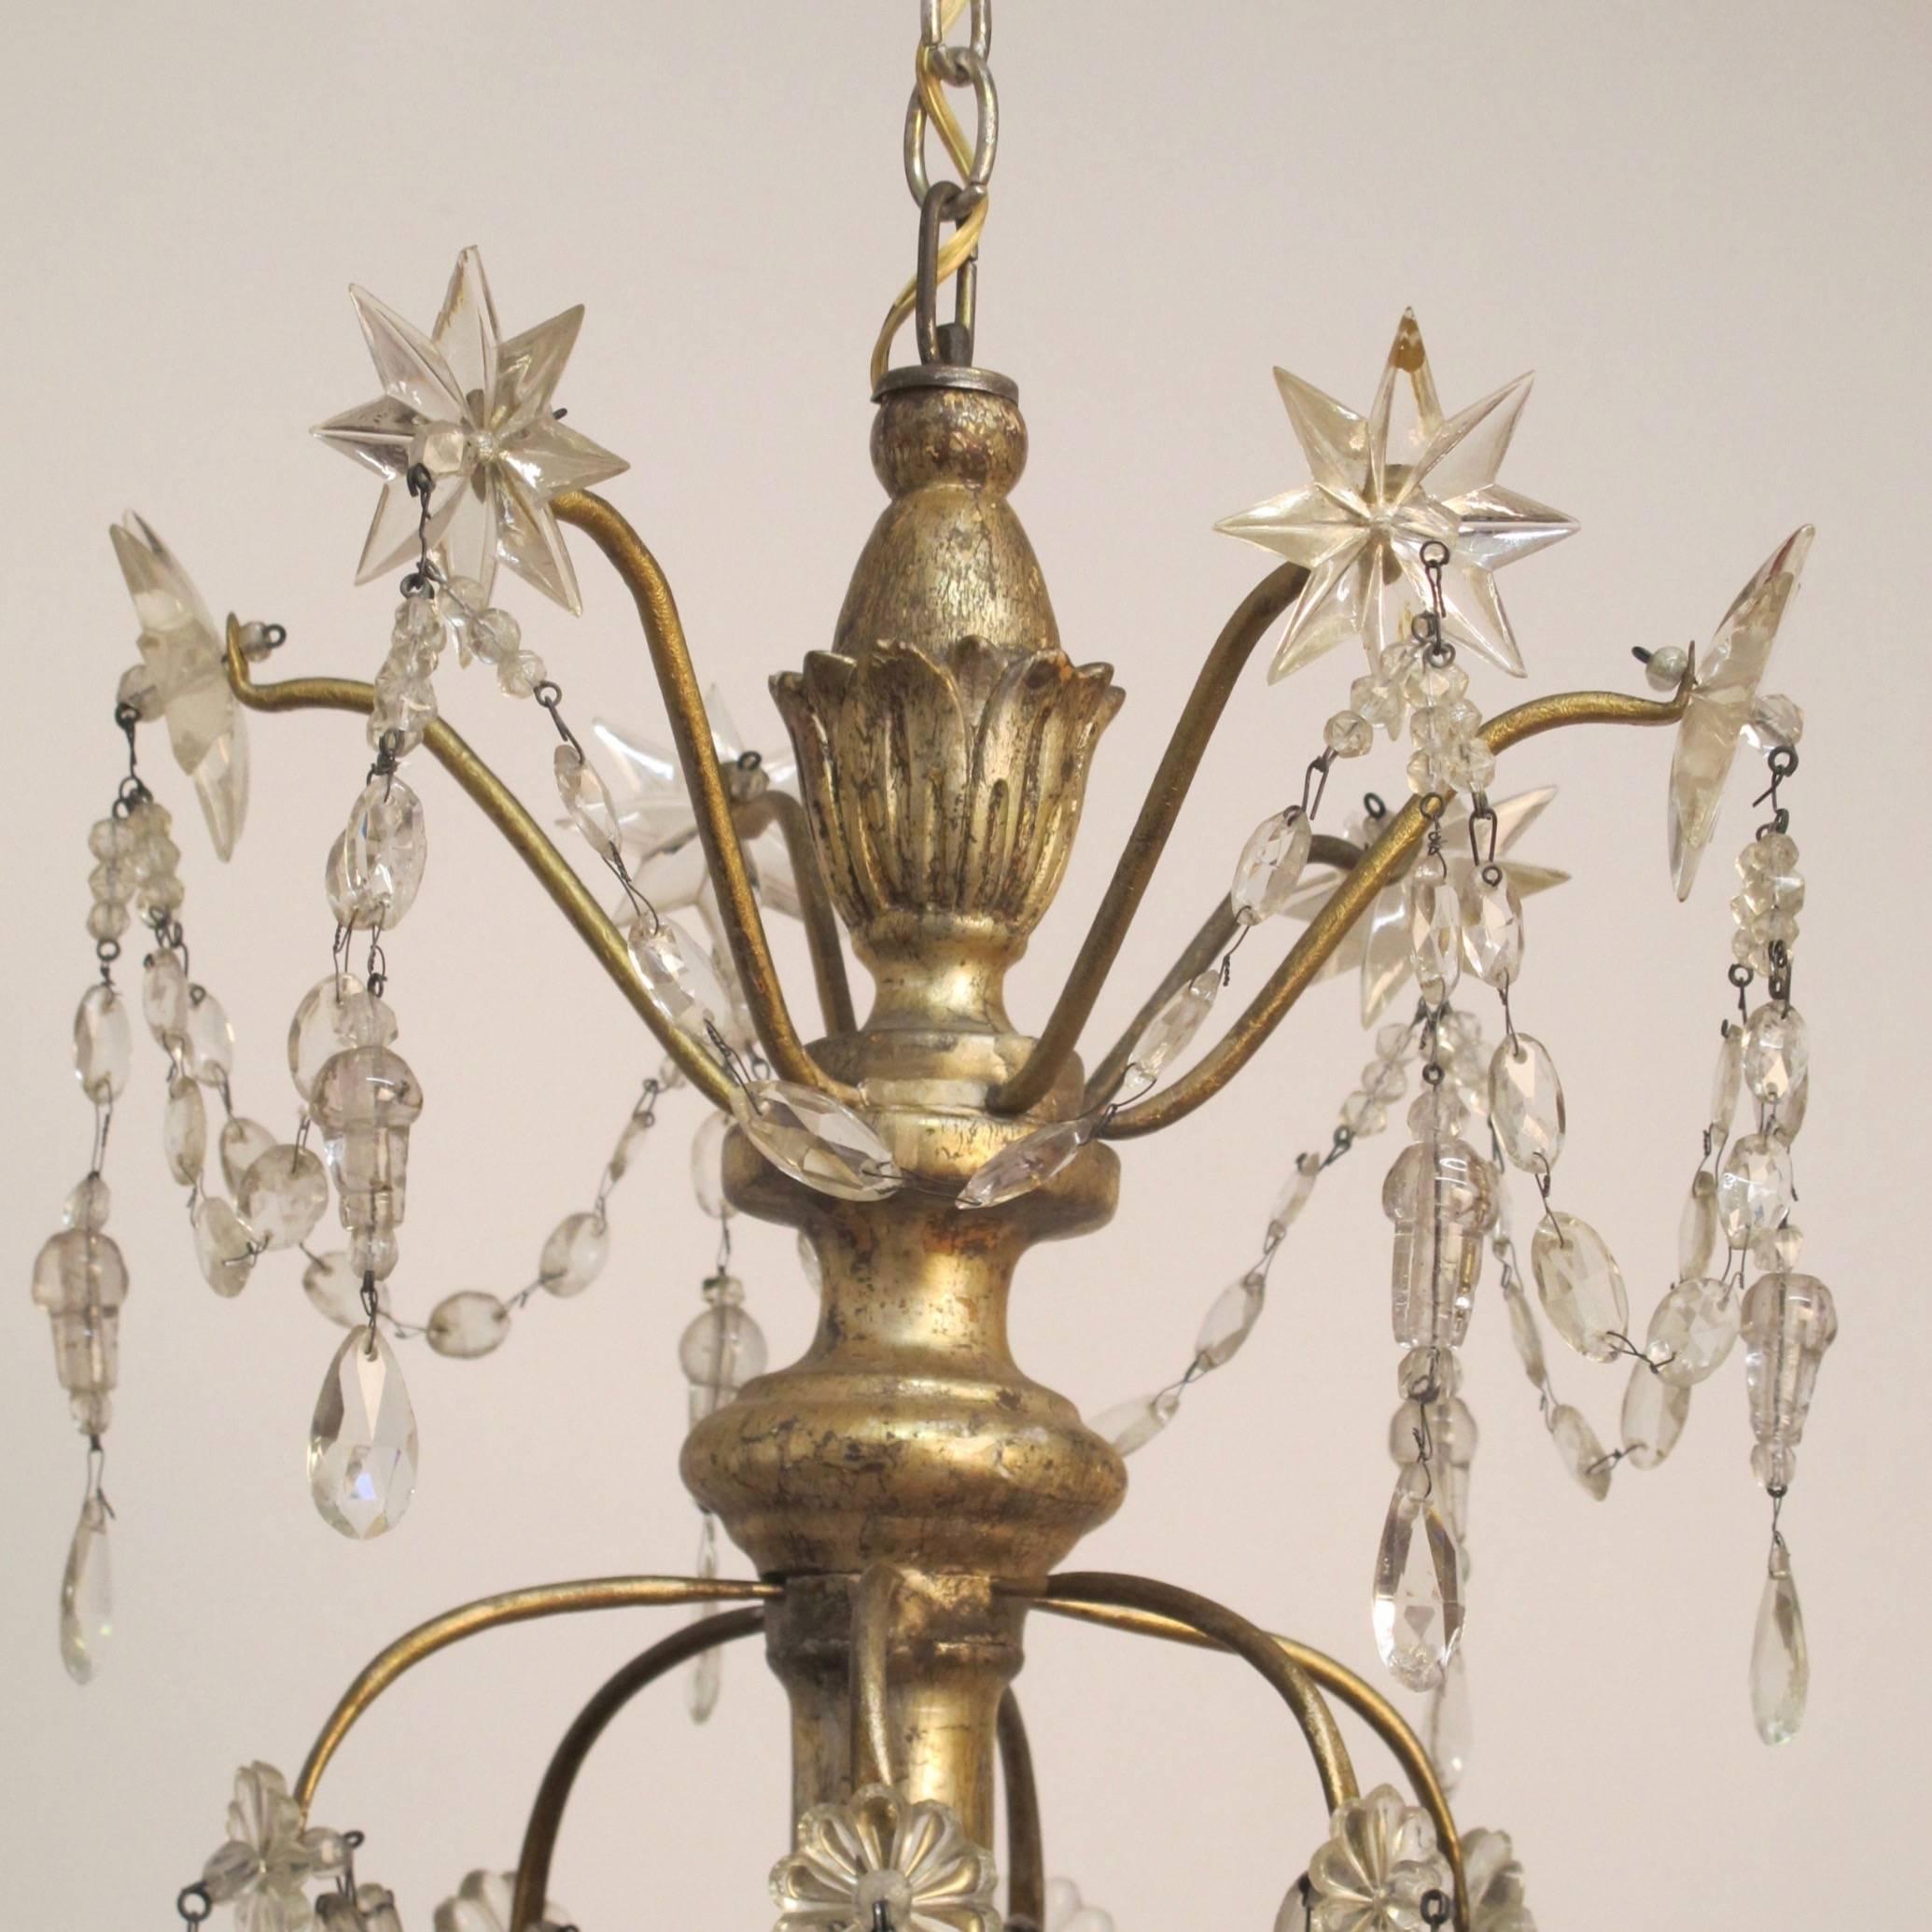 Large Silver Gilt Wood, Iron, and Crystal Chandelier, Italian 18th Century In Good Condition For Sale In San Francisco, CA